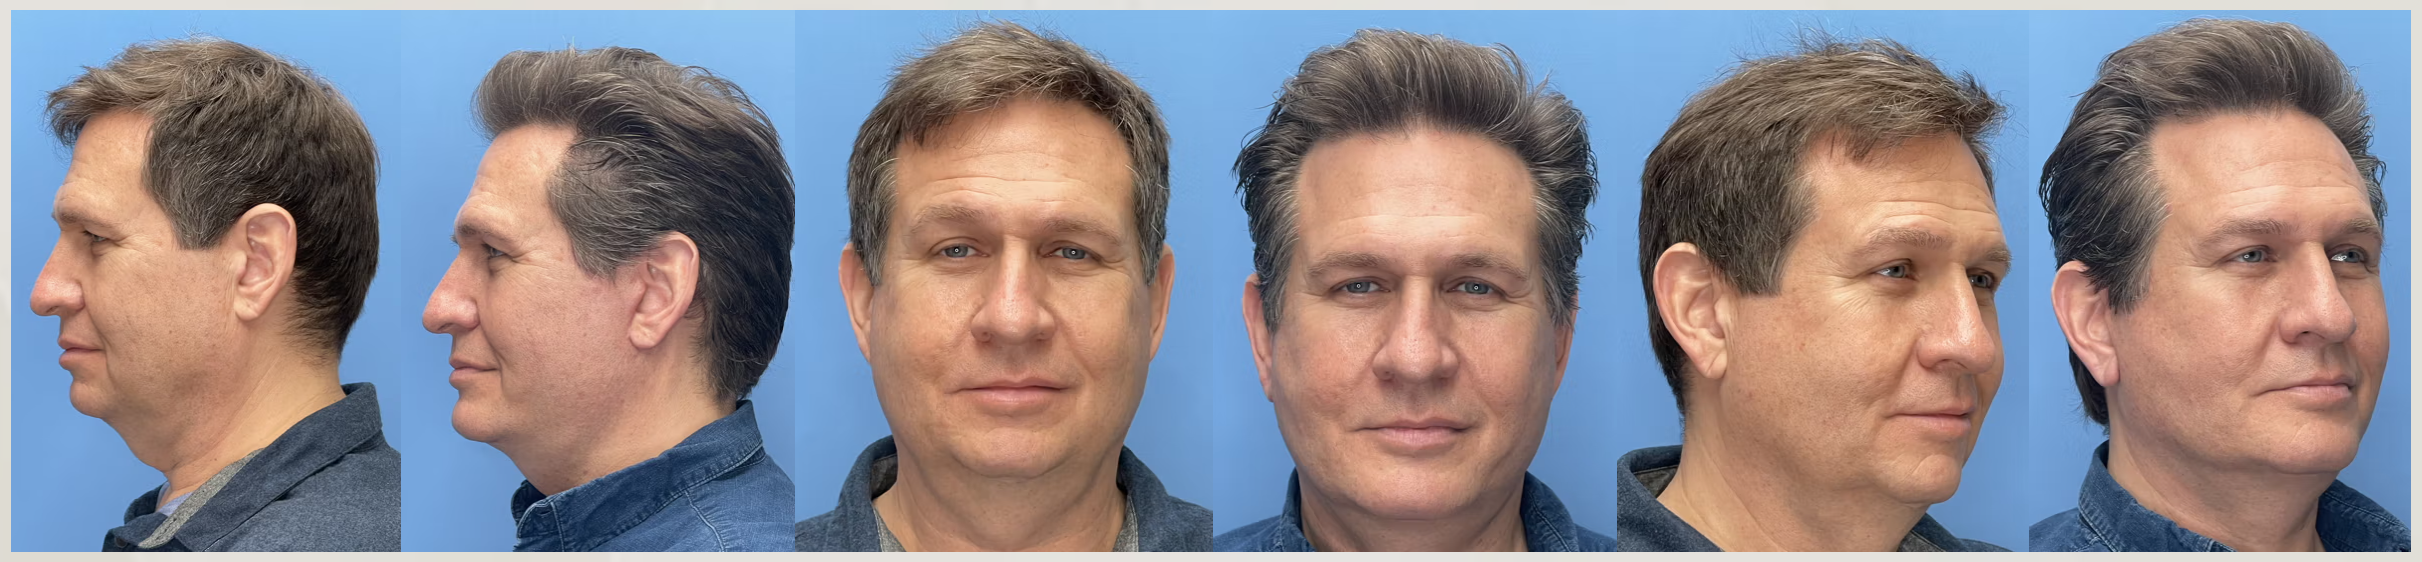 At Mommy Makeover Tijuana a facelift is a surgical procedure that involves lifting, trimming, and tightening the skin and tissues of the lower face and neck via discreet incisions.